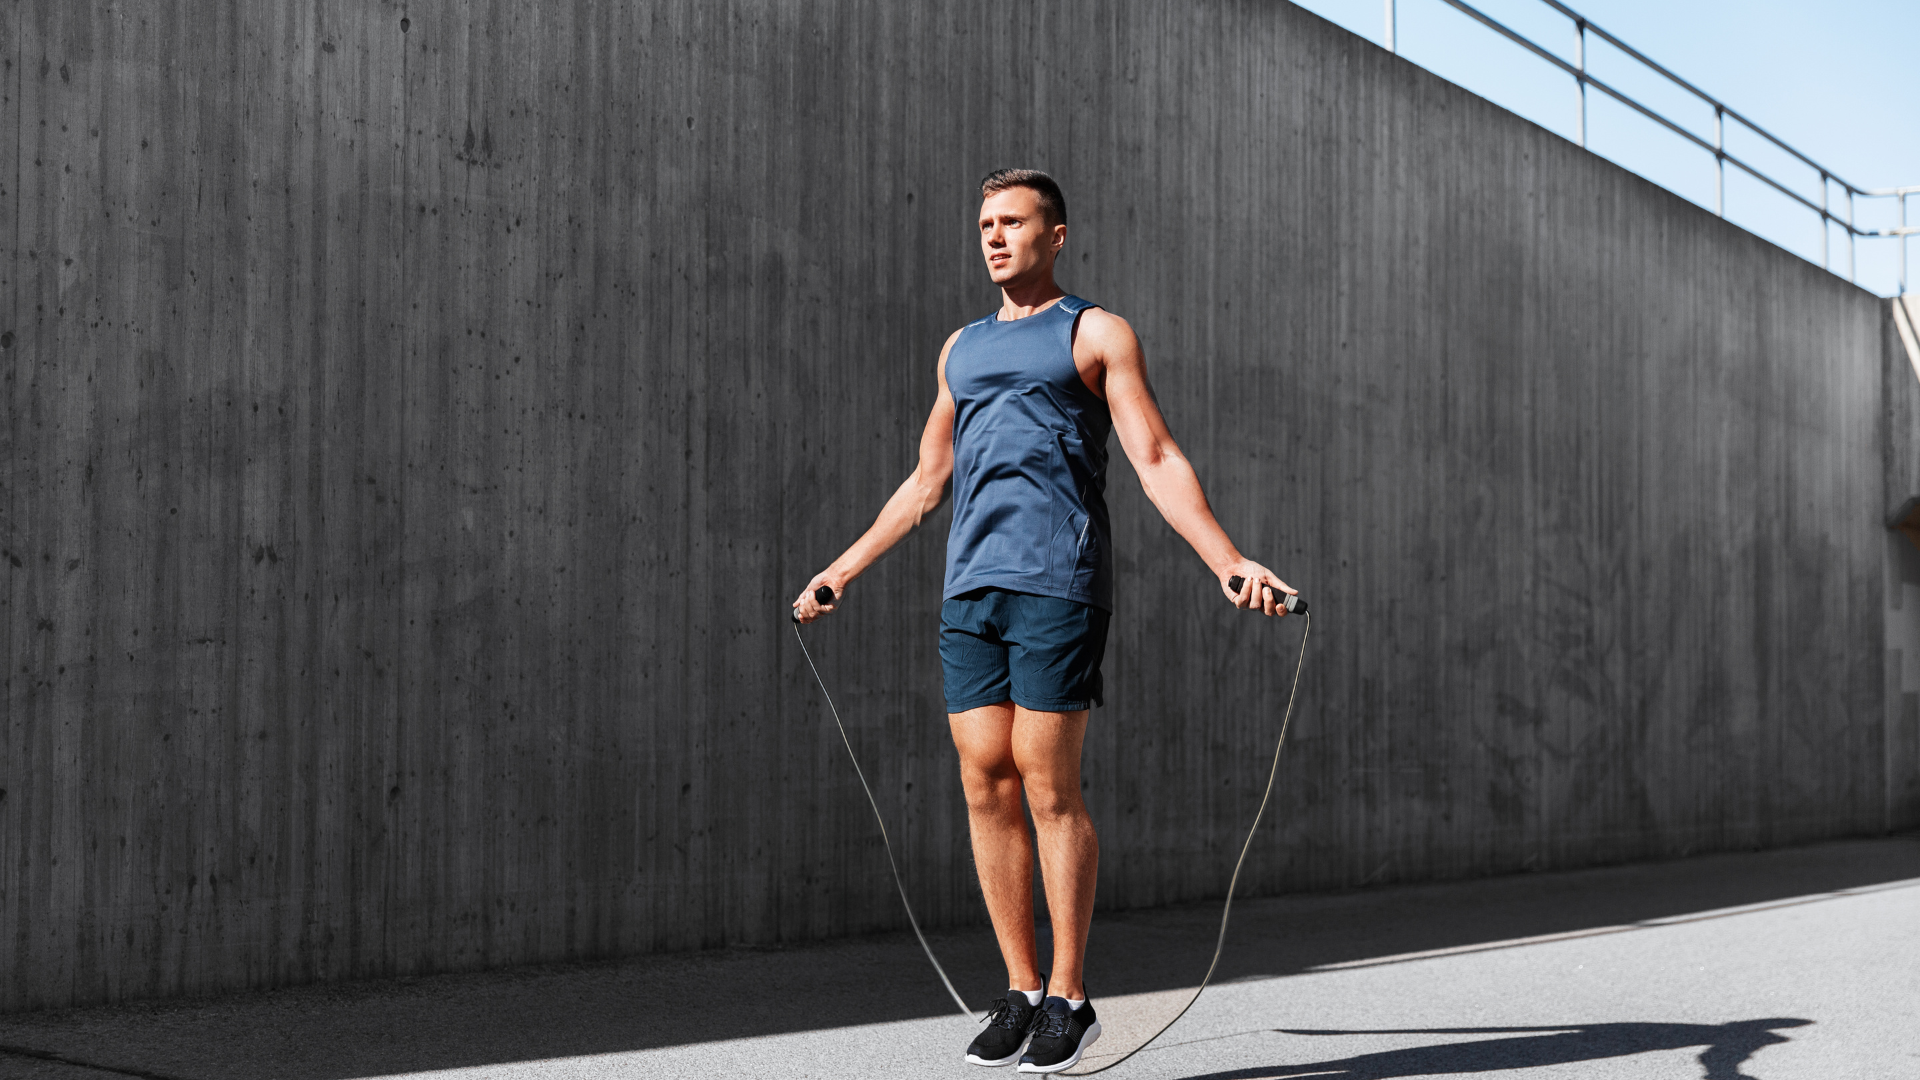 An active man wearing workout attire jumps rope with a focused expression, demonstrating high intensity and athleticism.